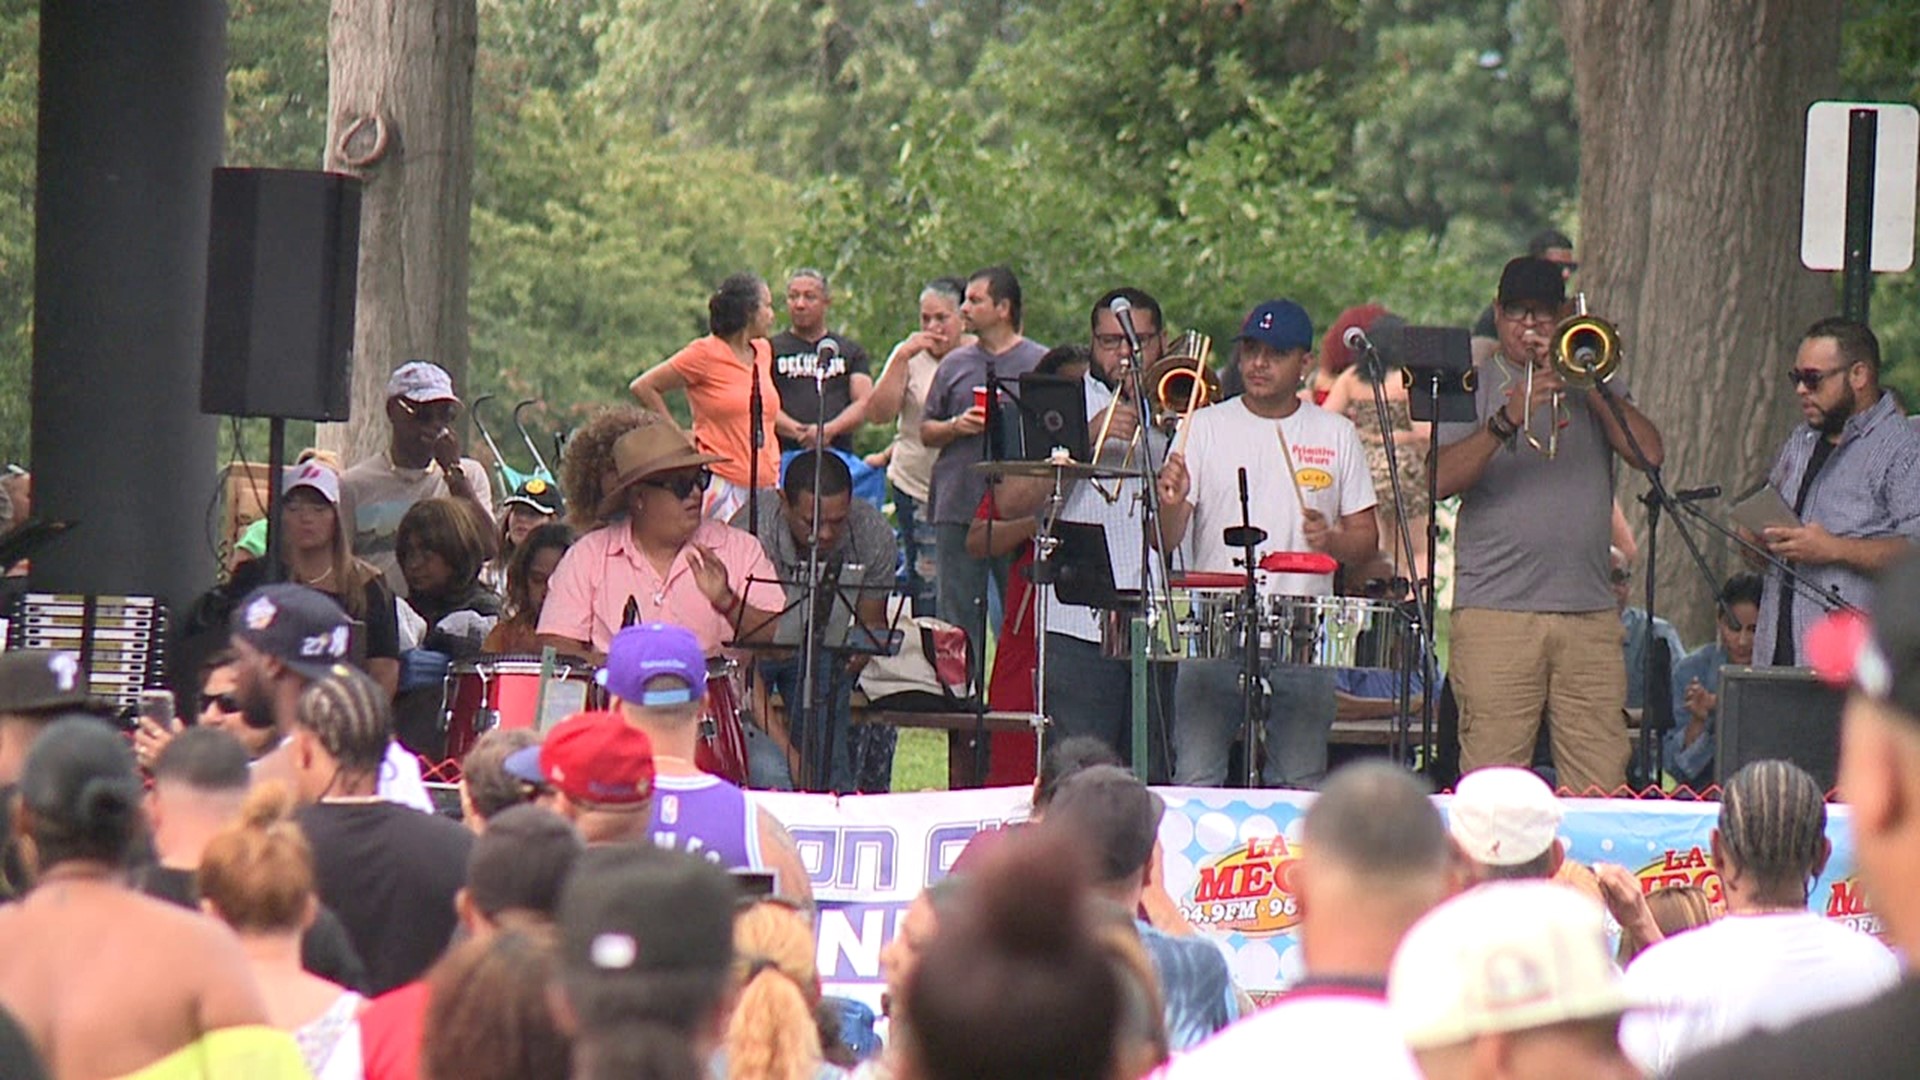 The 2nd Annual Latin Festival was held at Kirby Park Saturday.